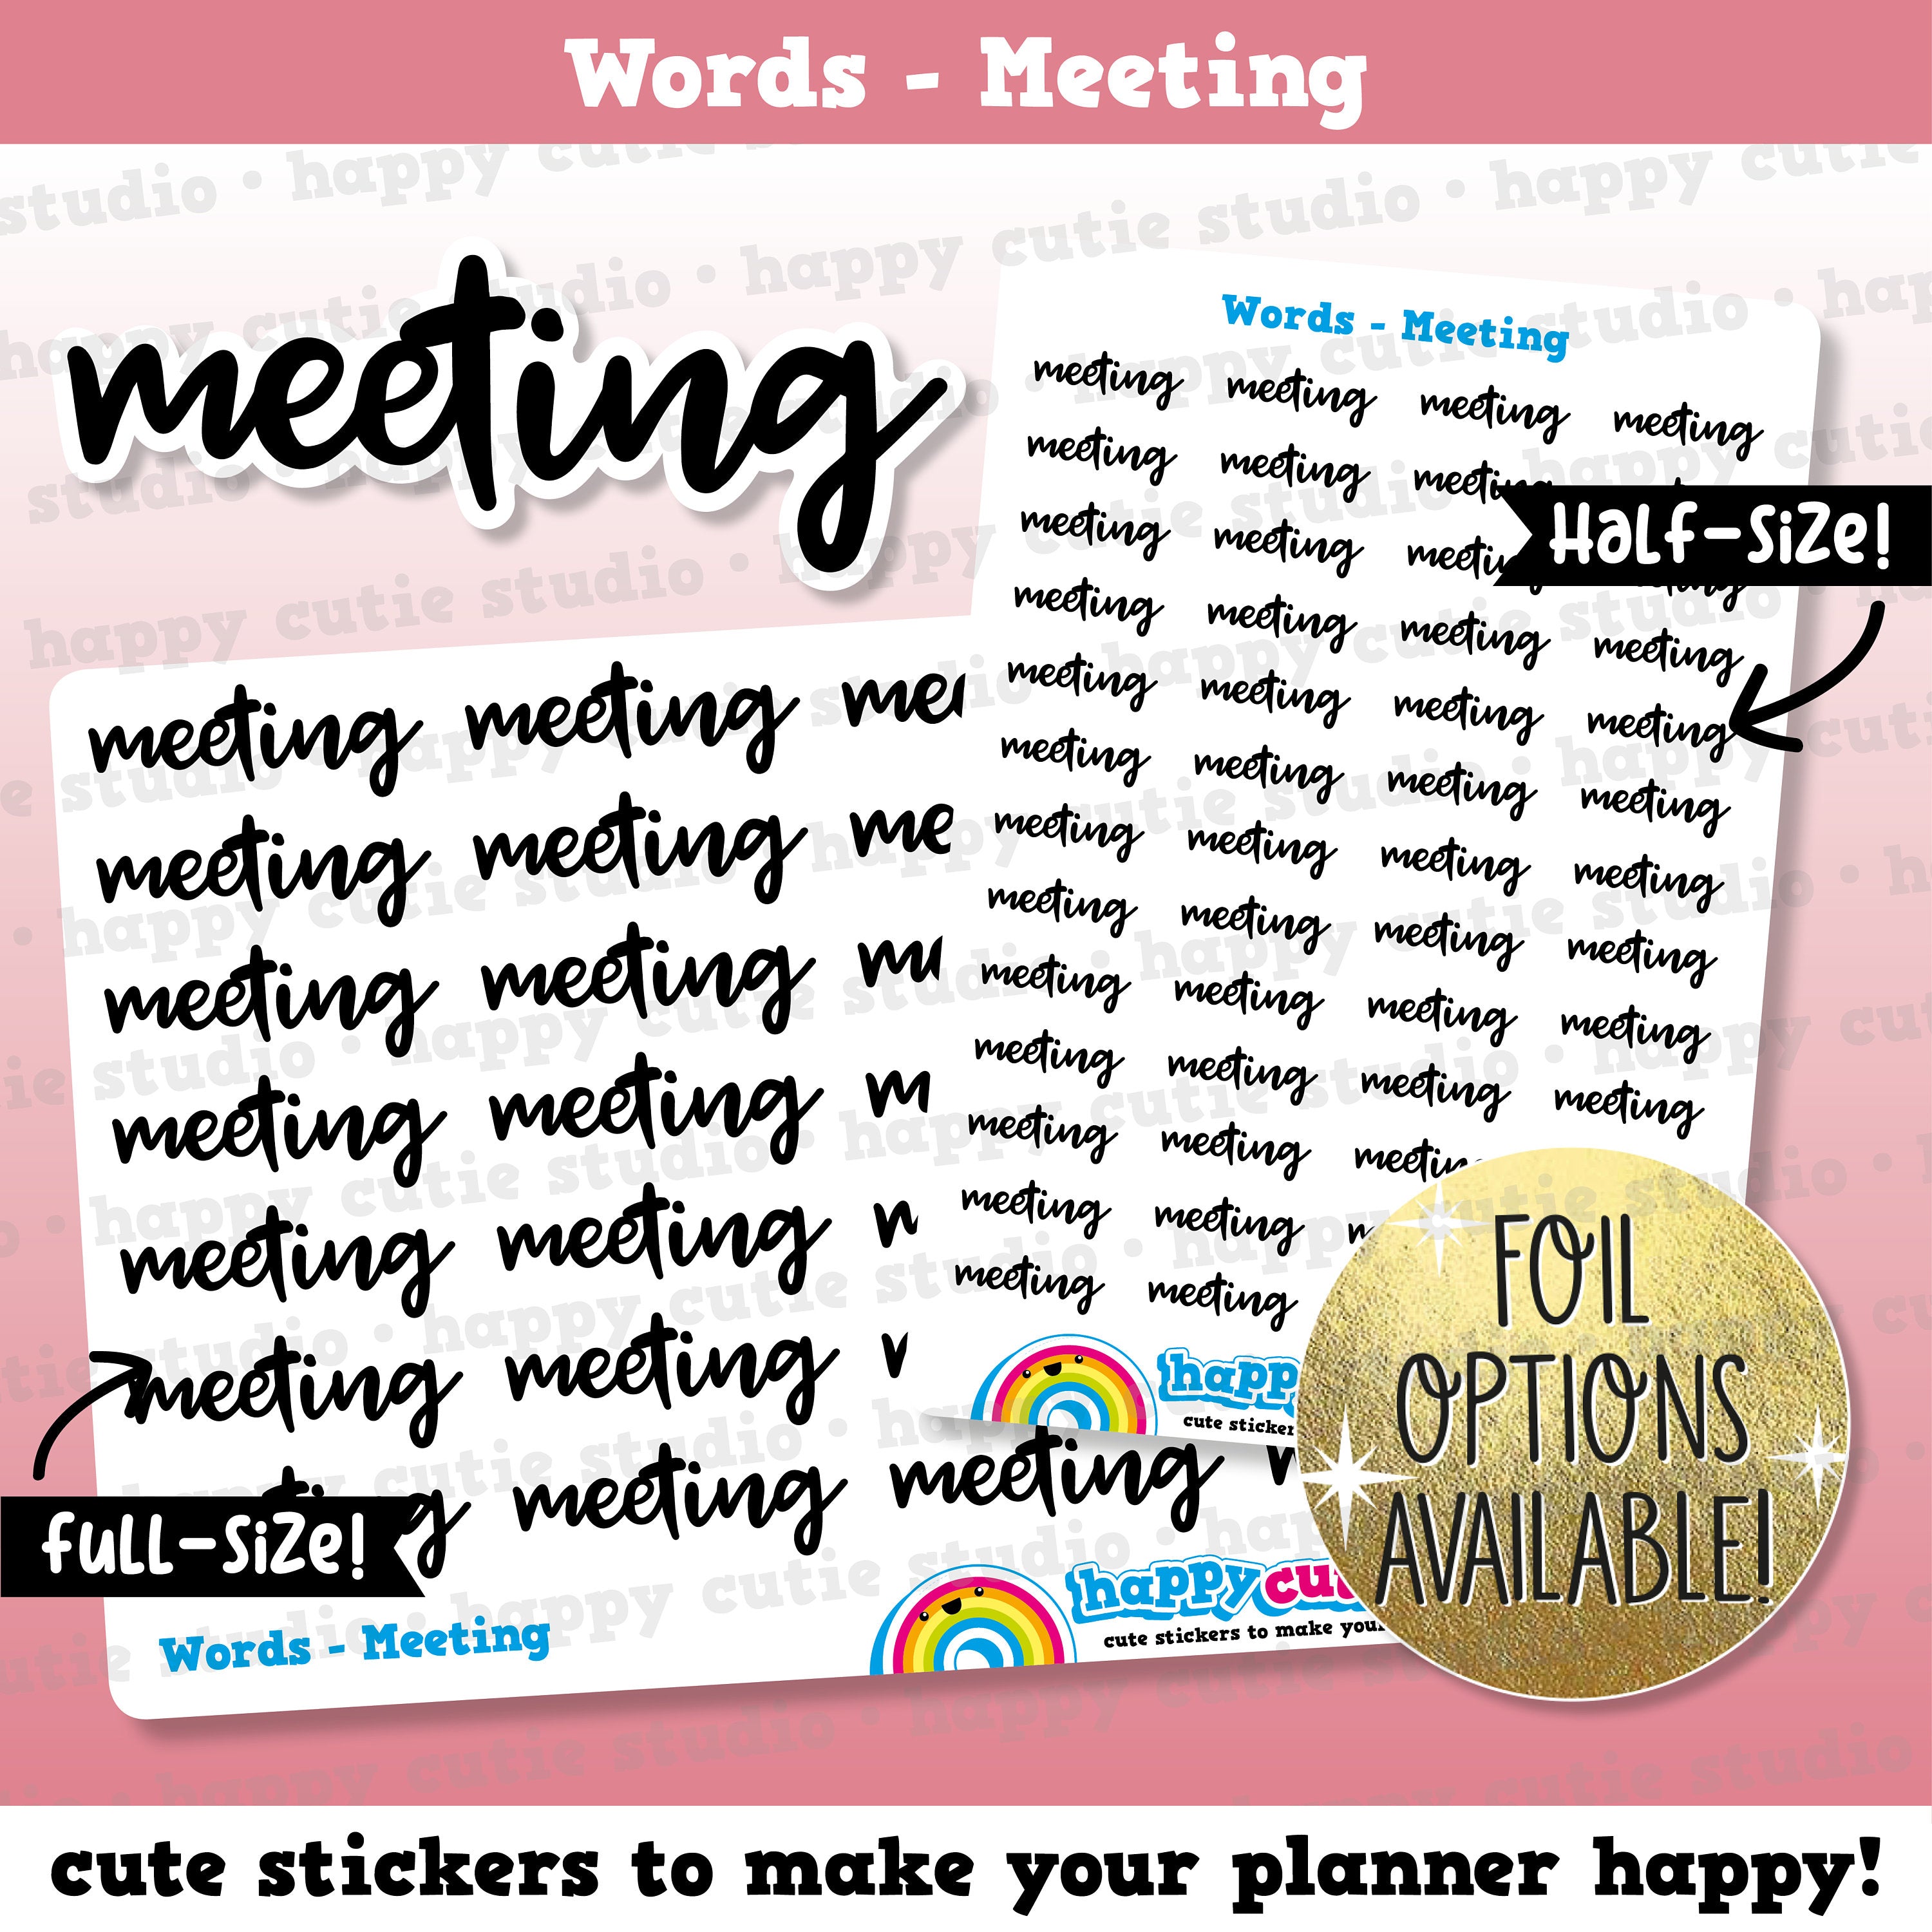 Meeting Words/Functional/Foil Planner Stickers